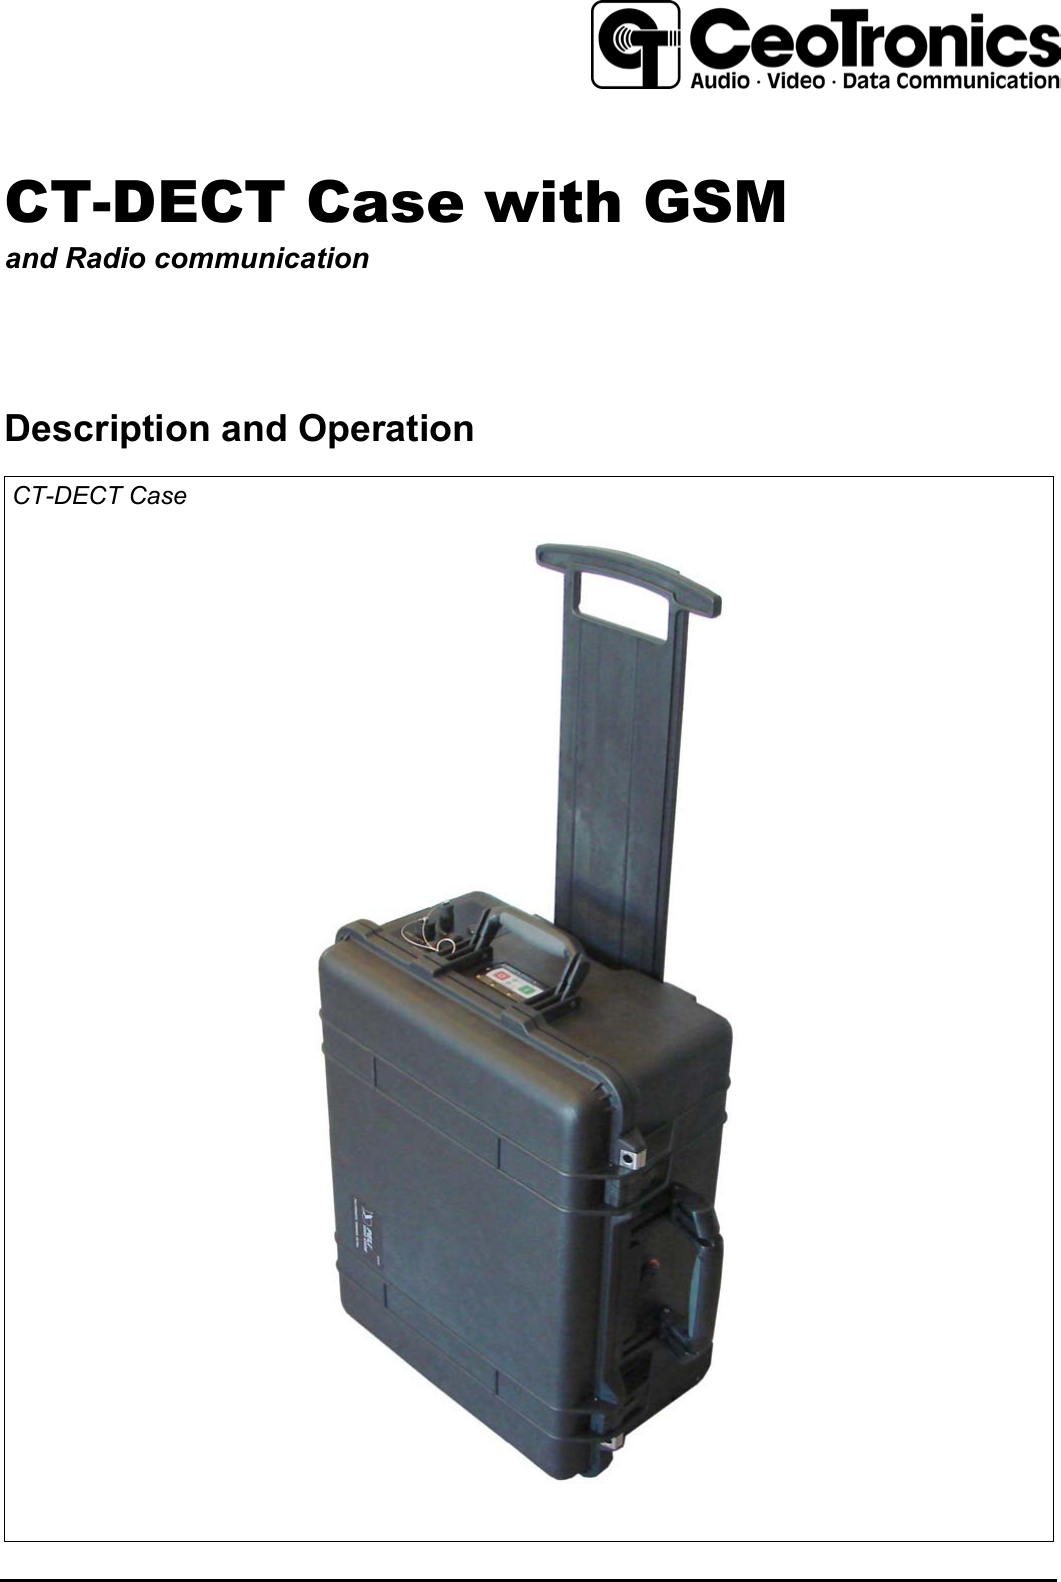        CT-DECT Case with GSM  and Radio communication      Description and Operation  CT-DECT Case    